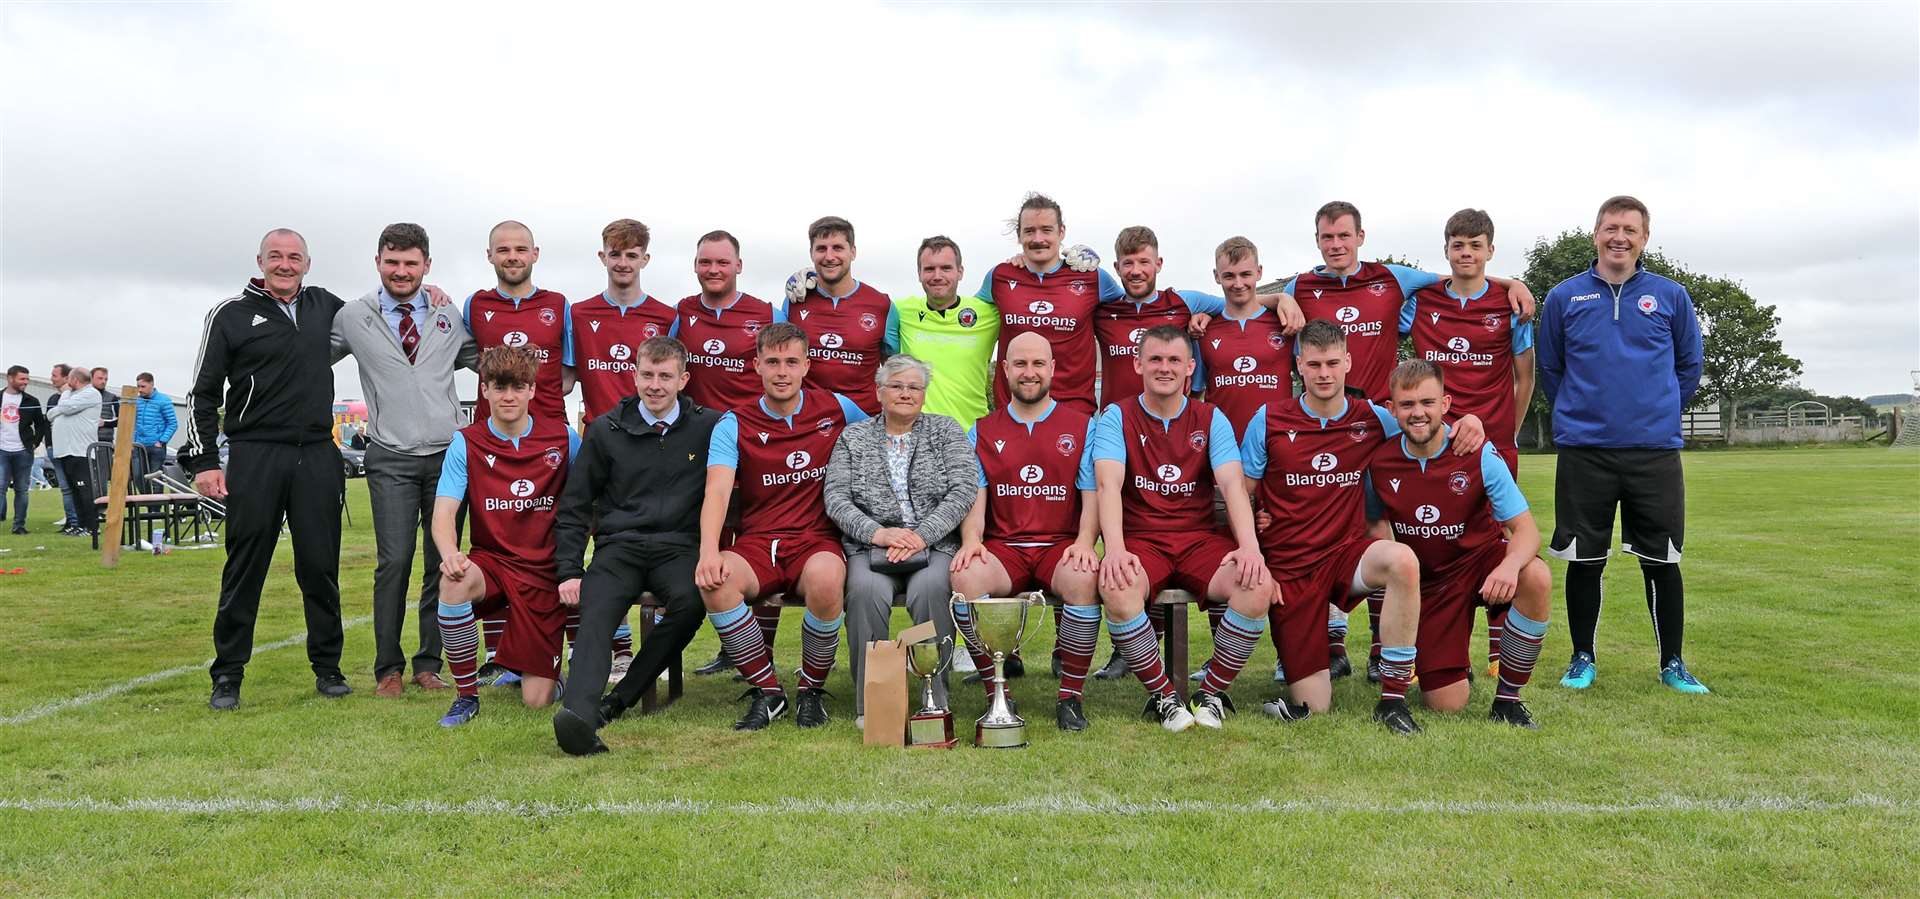 Mary Mackintosh and the victorious Pentland United team with the Eain Mackintosh Cup and the Alan (Bobo) Mackay memorial trophy for the man of the match, Andy Mackay. Picture: James Gunn